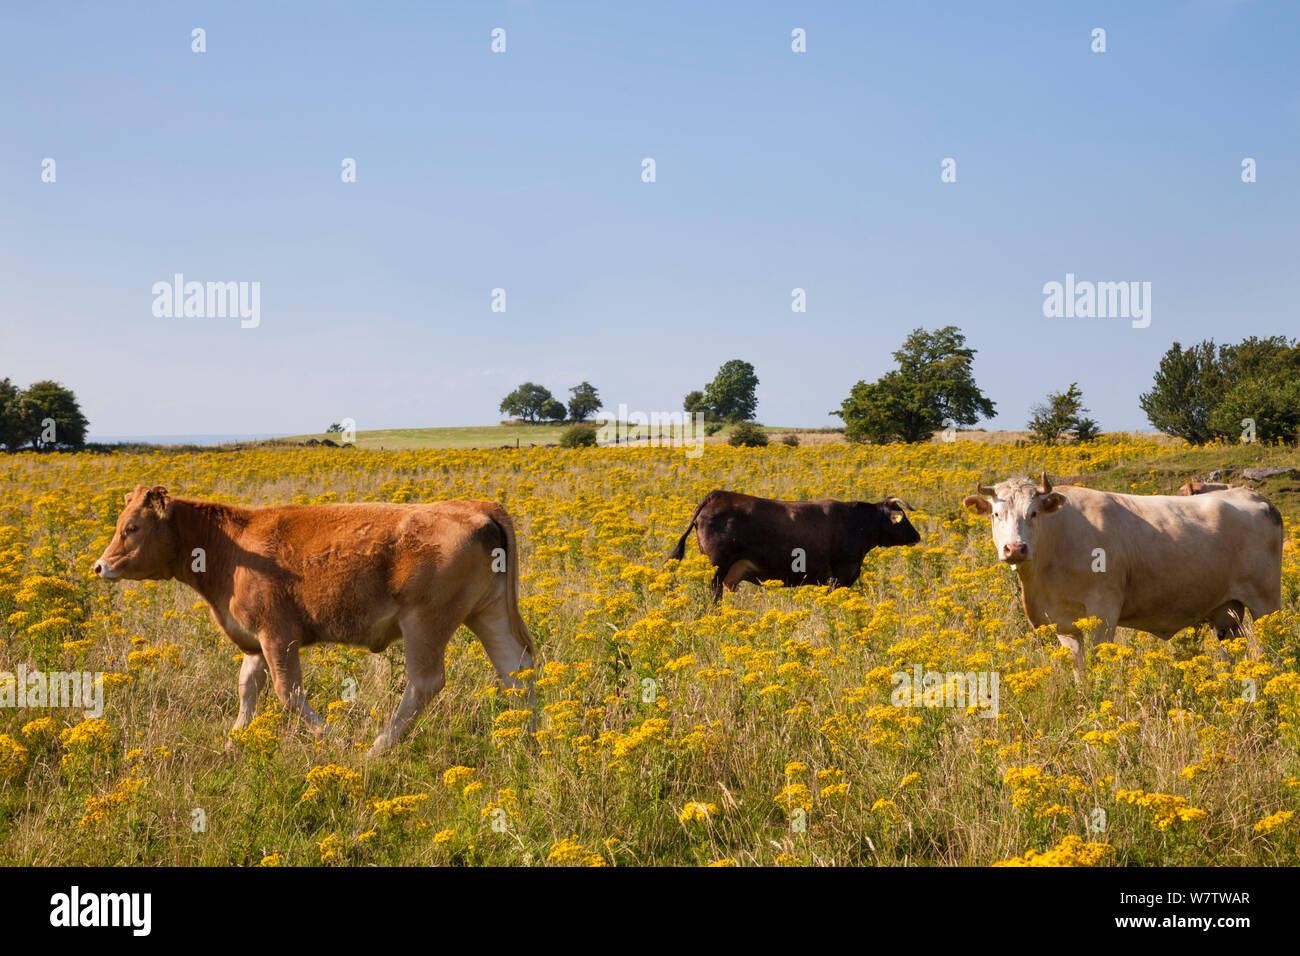 Common Ragwort (Jacobaea vulgaris) flowers in field with cattle, Derbyshire, England, UK, August. Invasive species, poisonous to livestock. Stock Photo